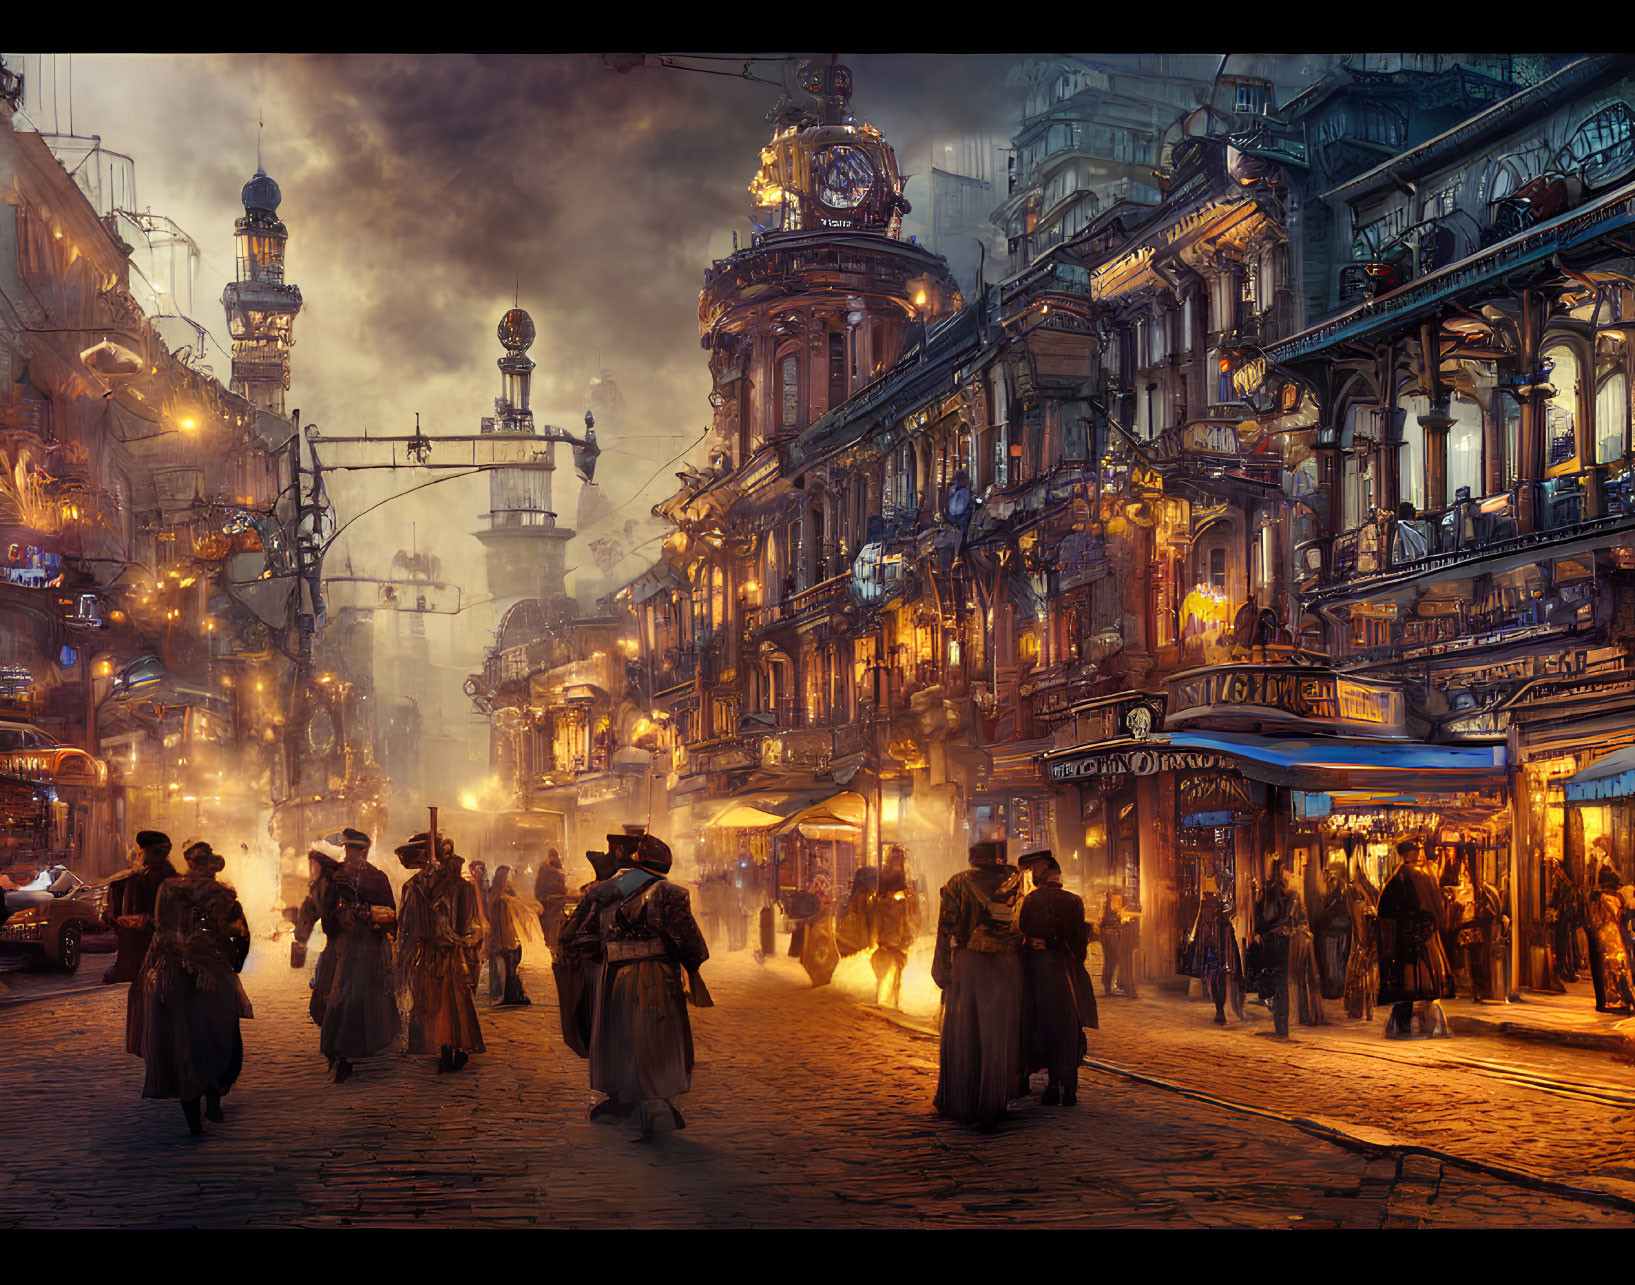 Historical city street at dusk with vintage attire, ornate buildings, and dramatic sky